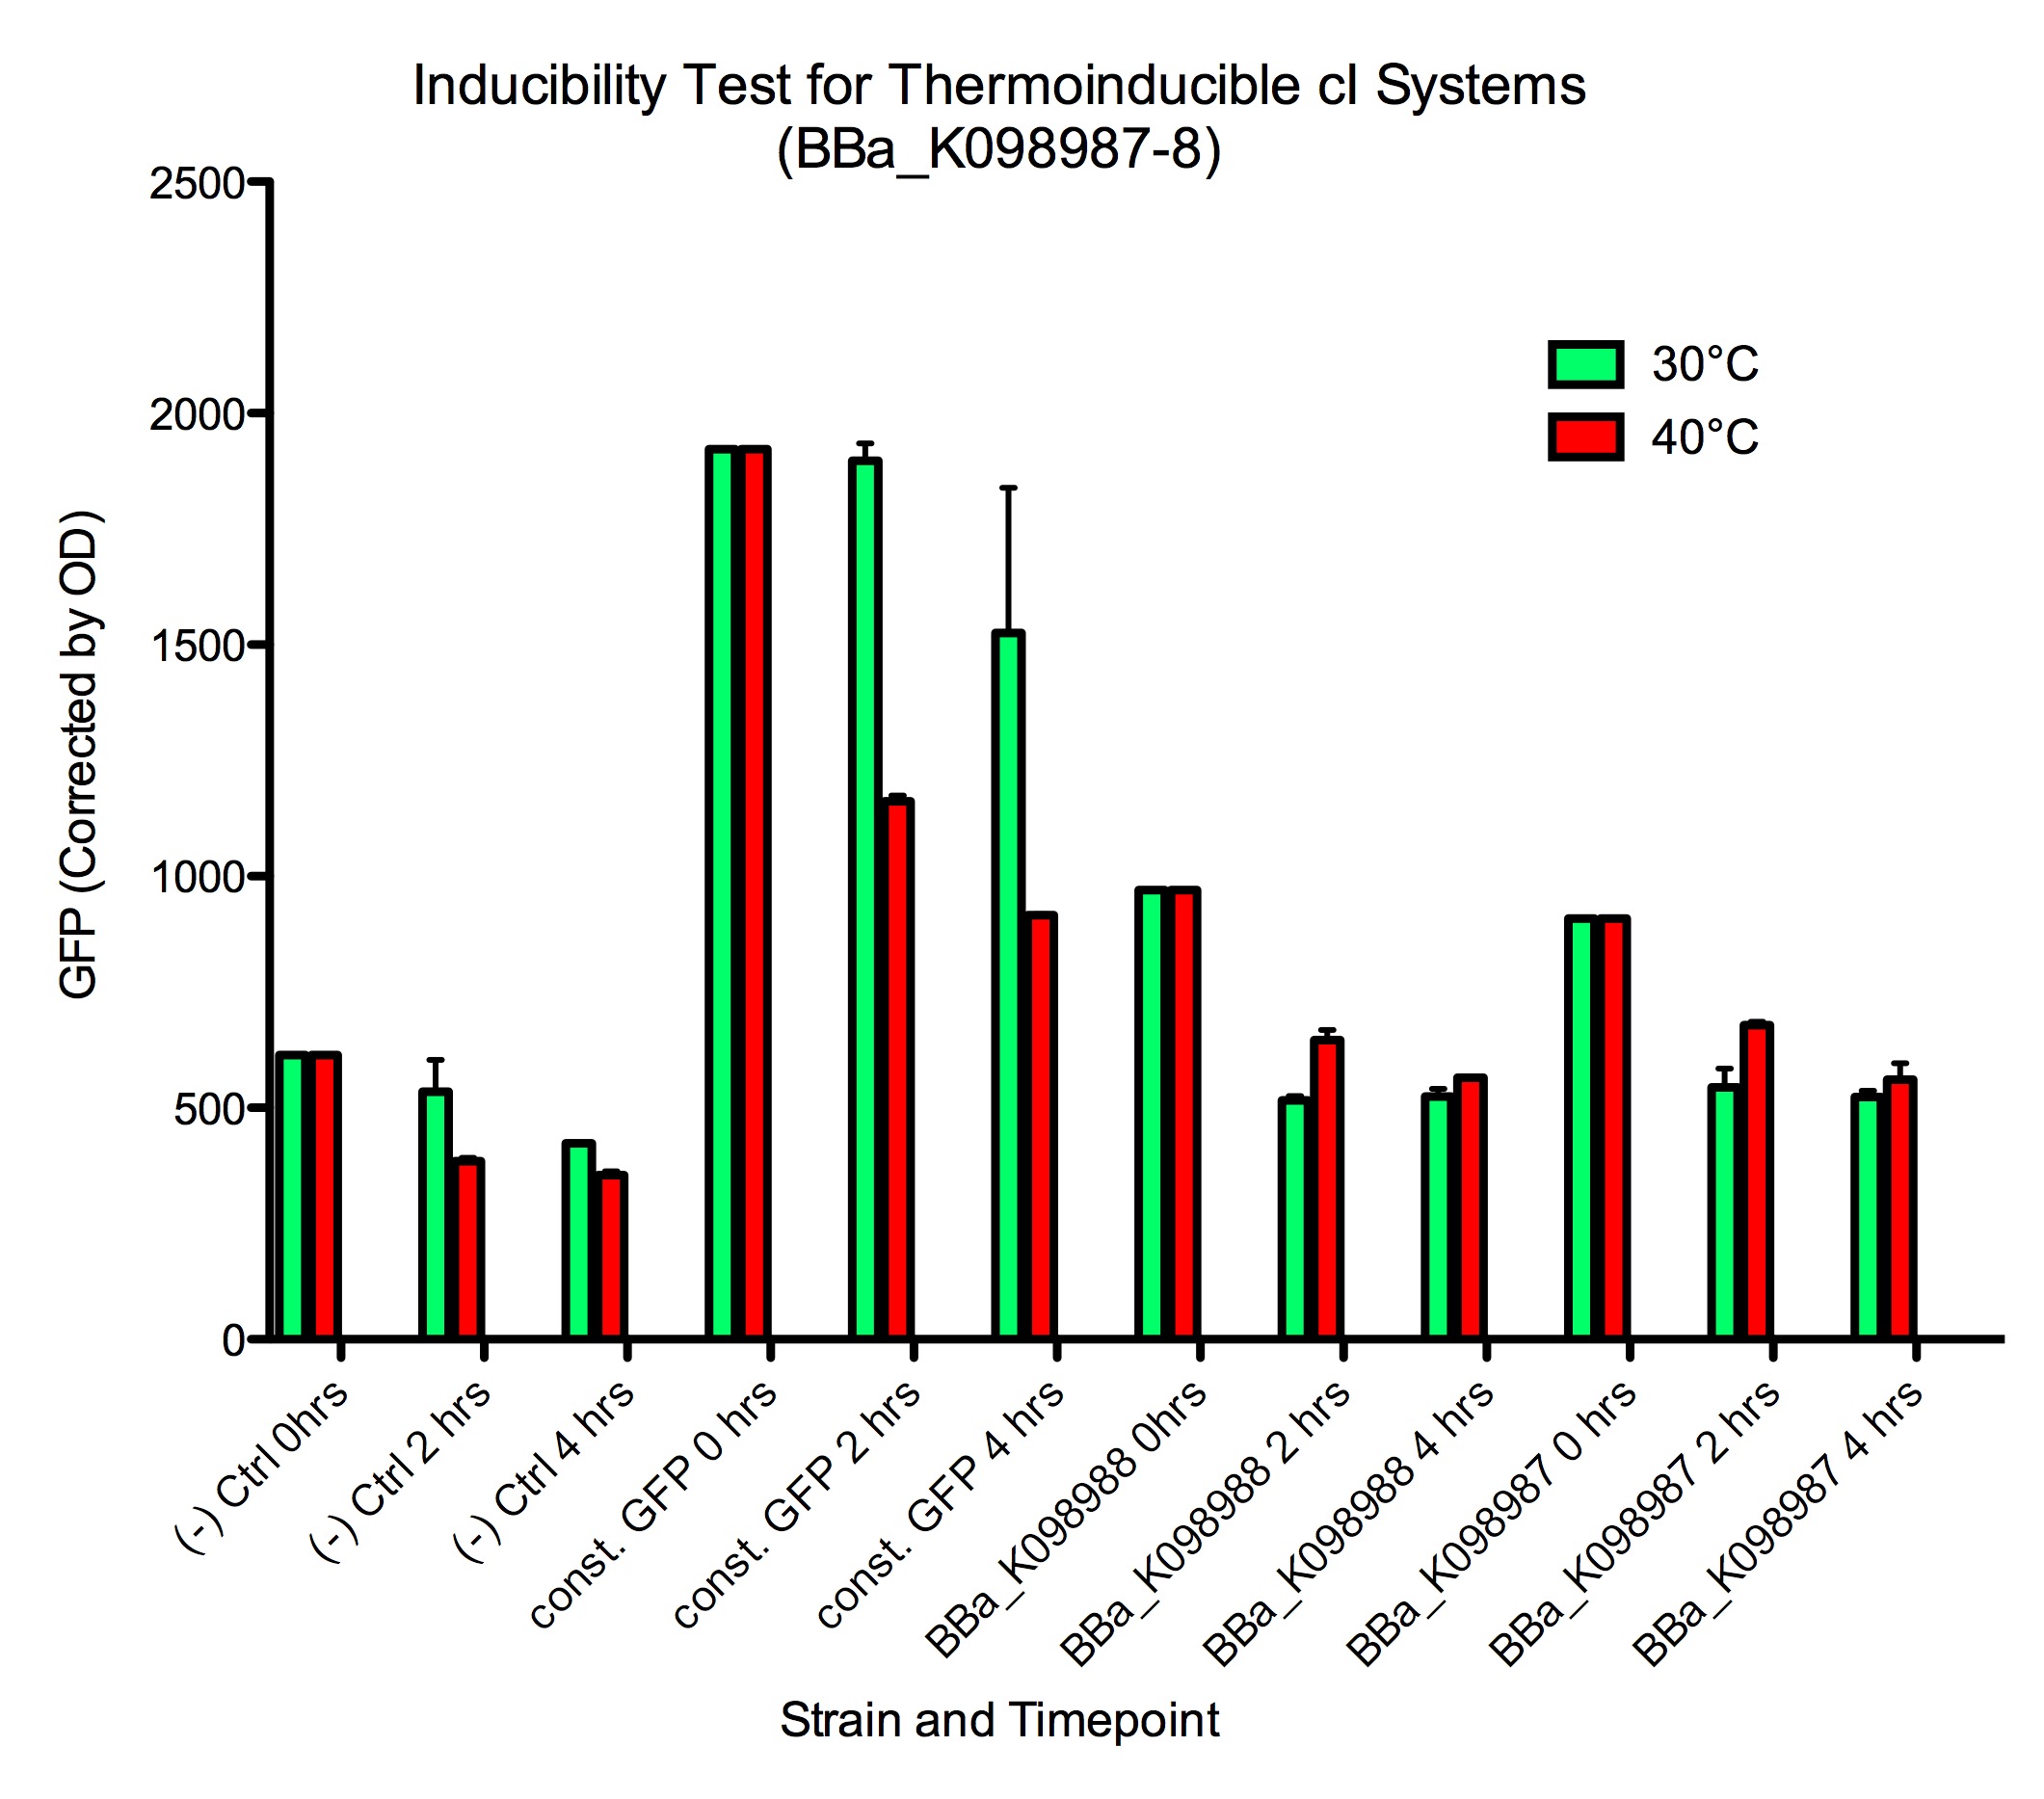 Thermo Inducibility Results